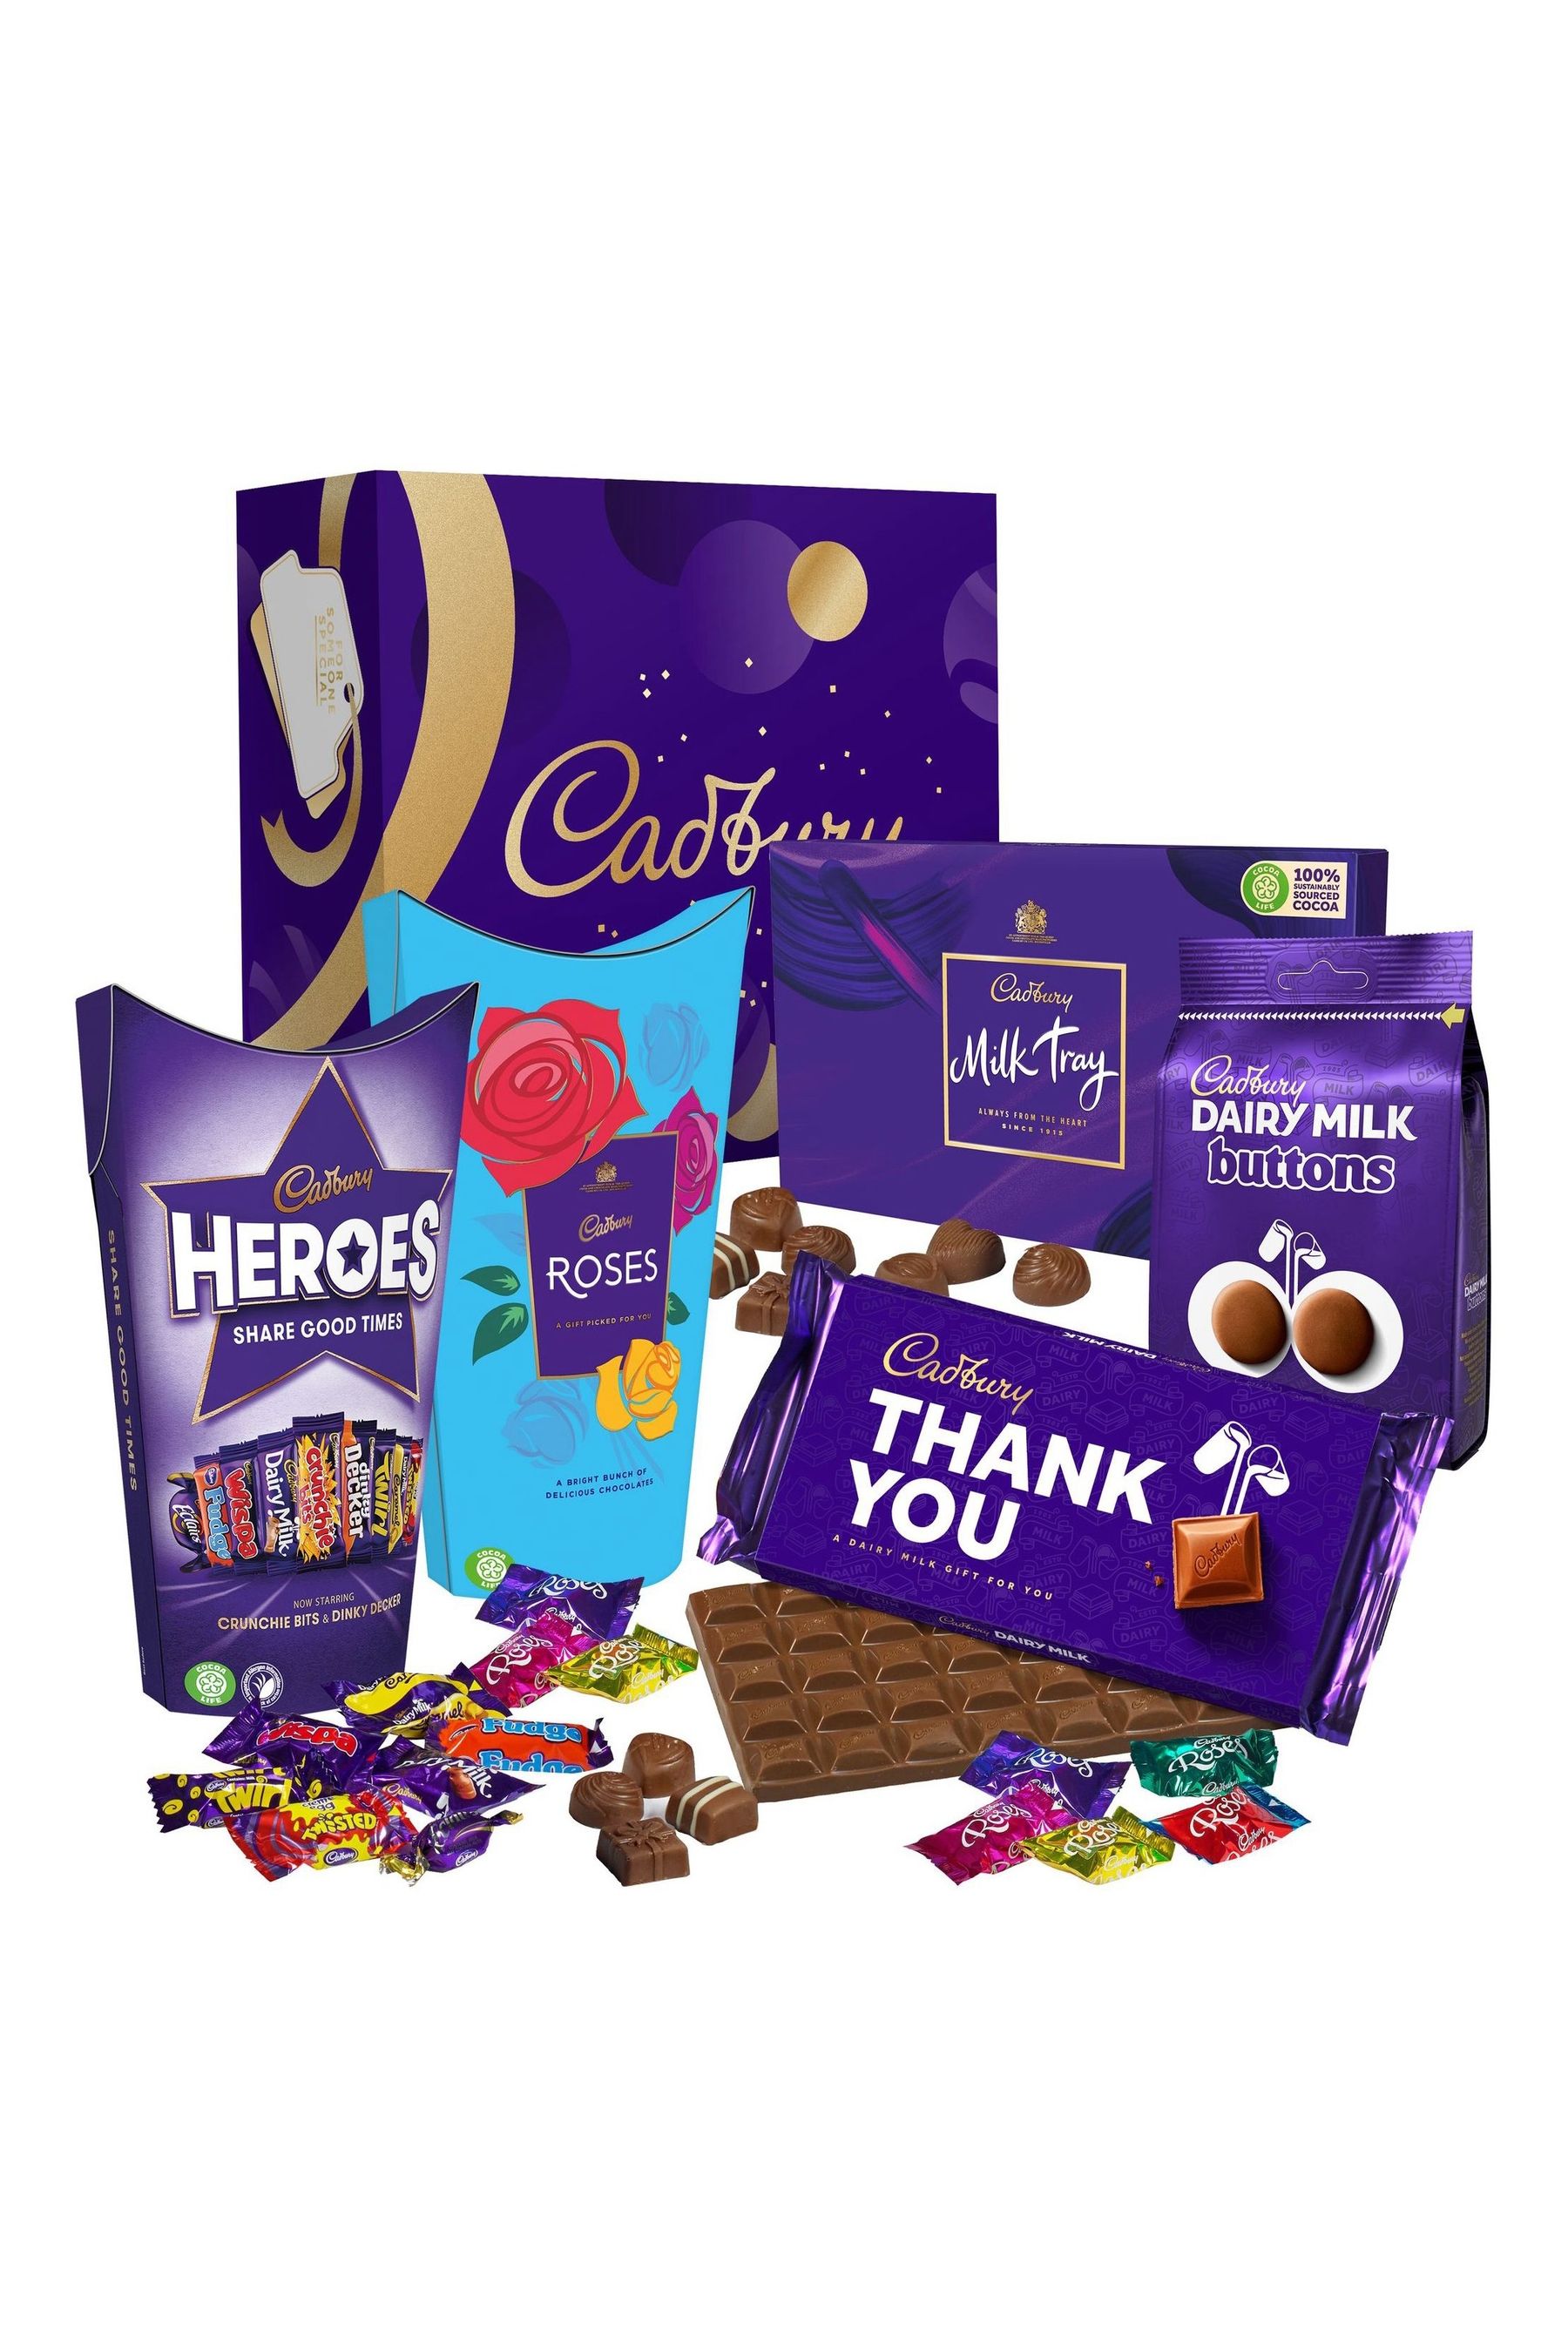 Nestle & Cadbury Dairy Milk Chocolate Gift Box, Luxury Cadbury Chocolate  Selection, Perfect Chocolate Gift for Special Occasions, 16 Full Bar  Chocolate Set : Amazon.co.uk: Grocery